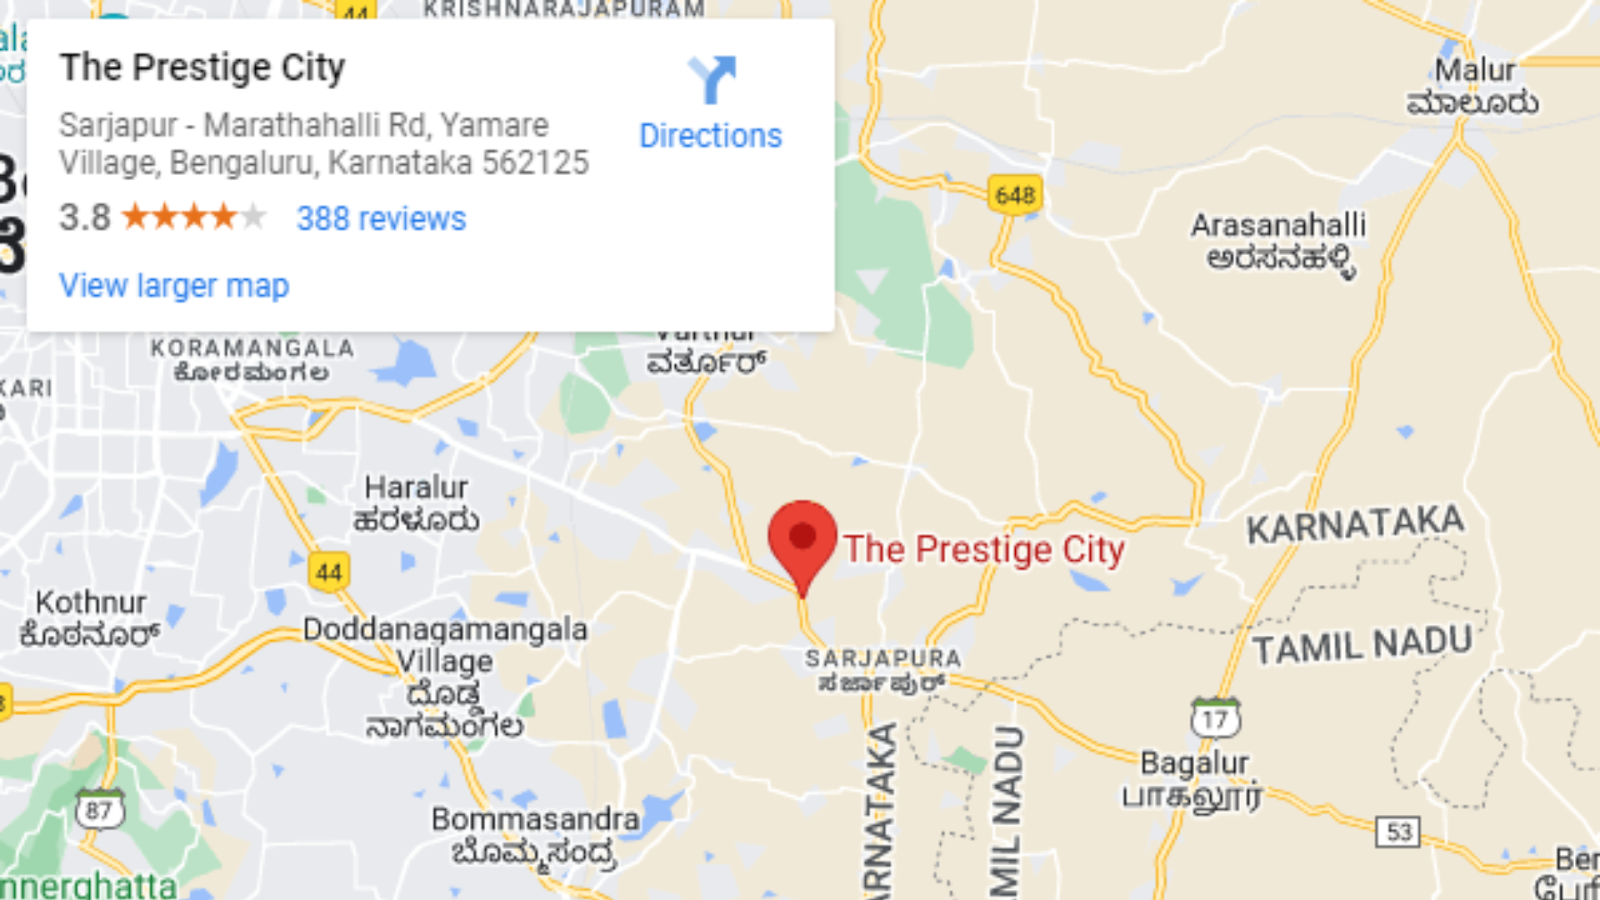 The best location for your luxury lifestyle and best for the future will be at the Prestige City in Sarjapur.